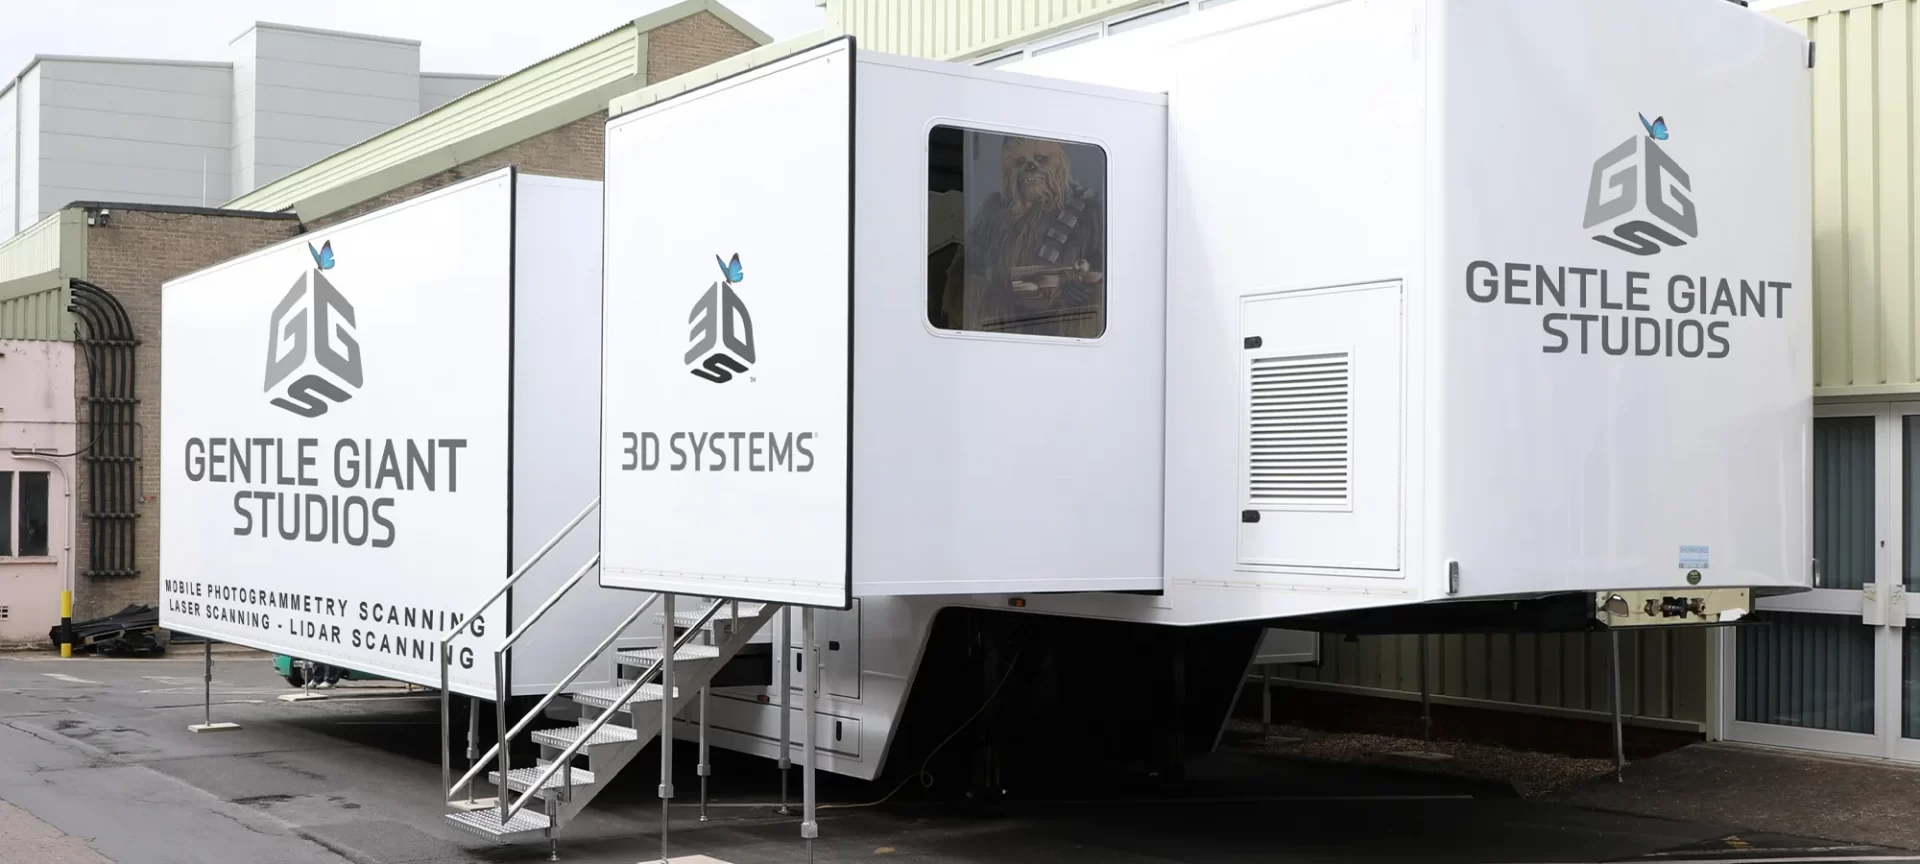 3D systems giant studio